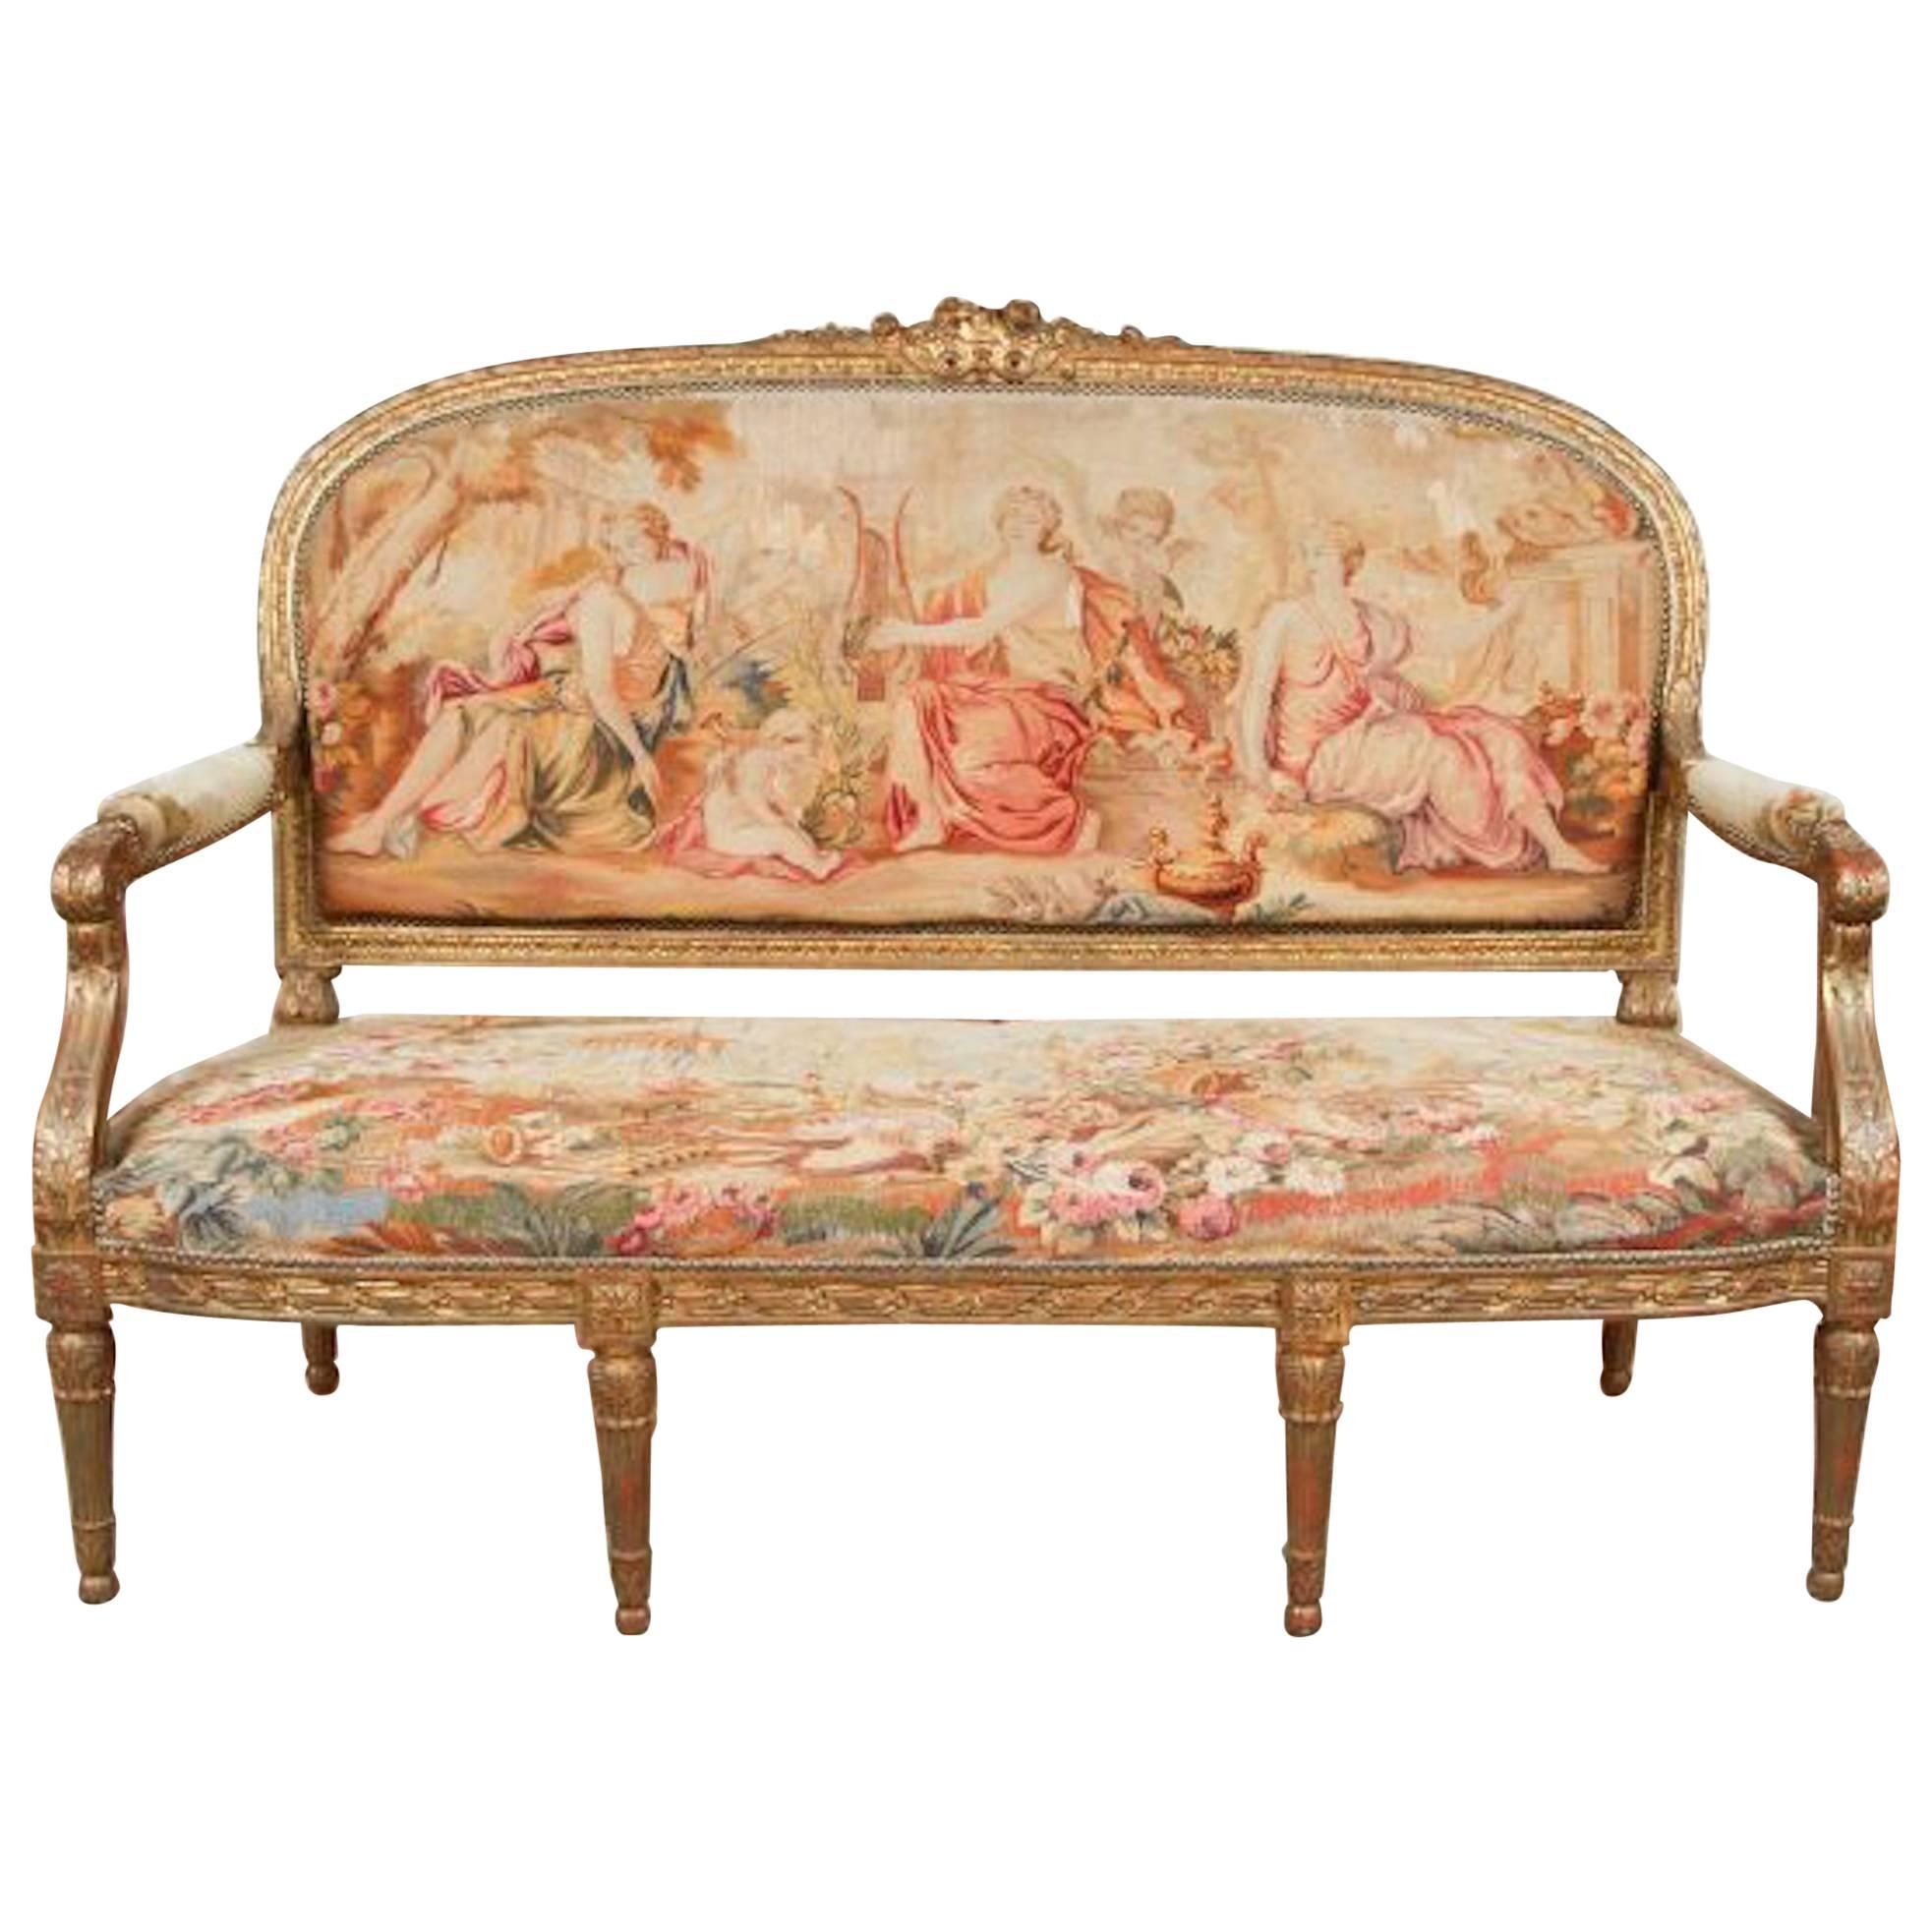 19th Century Louis XVI Style Giltwood Canapé Settee For Sale